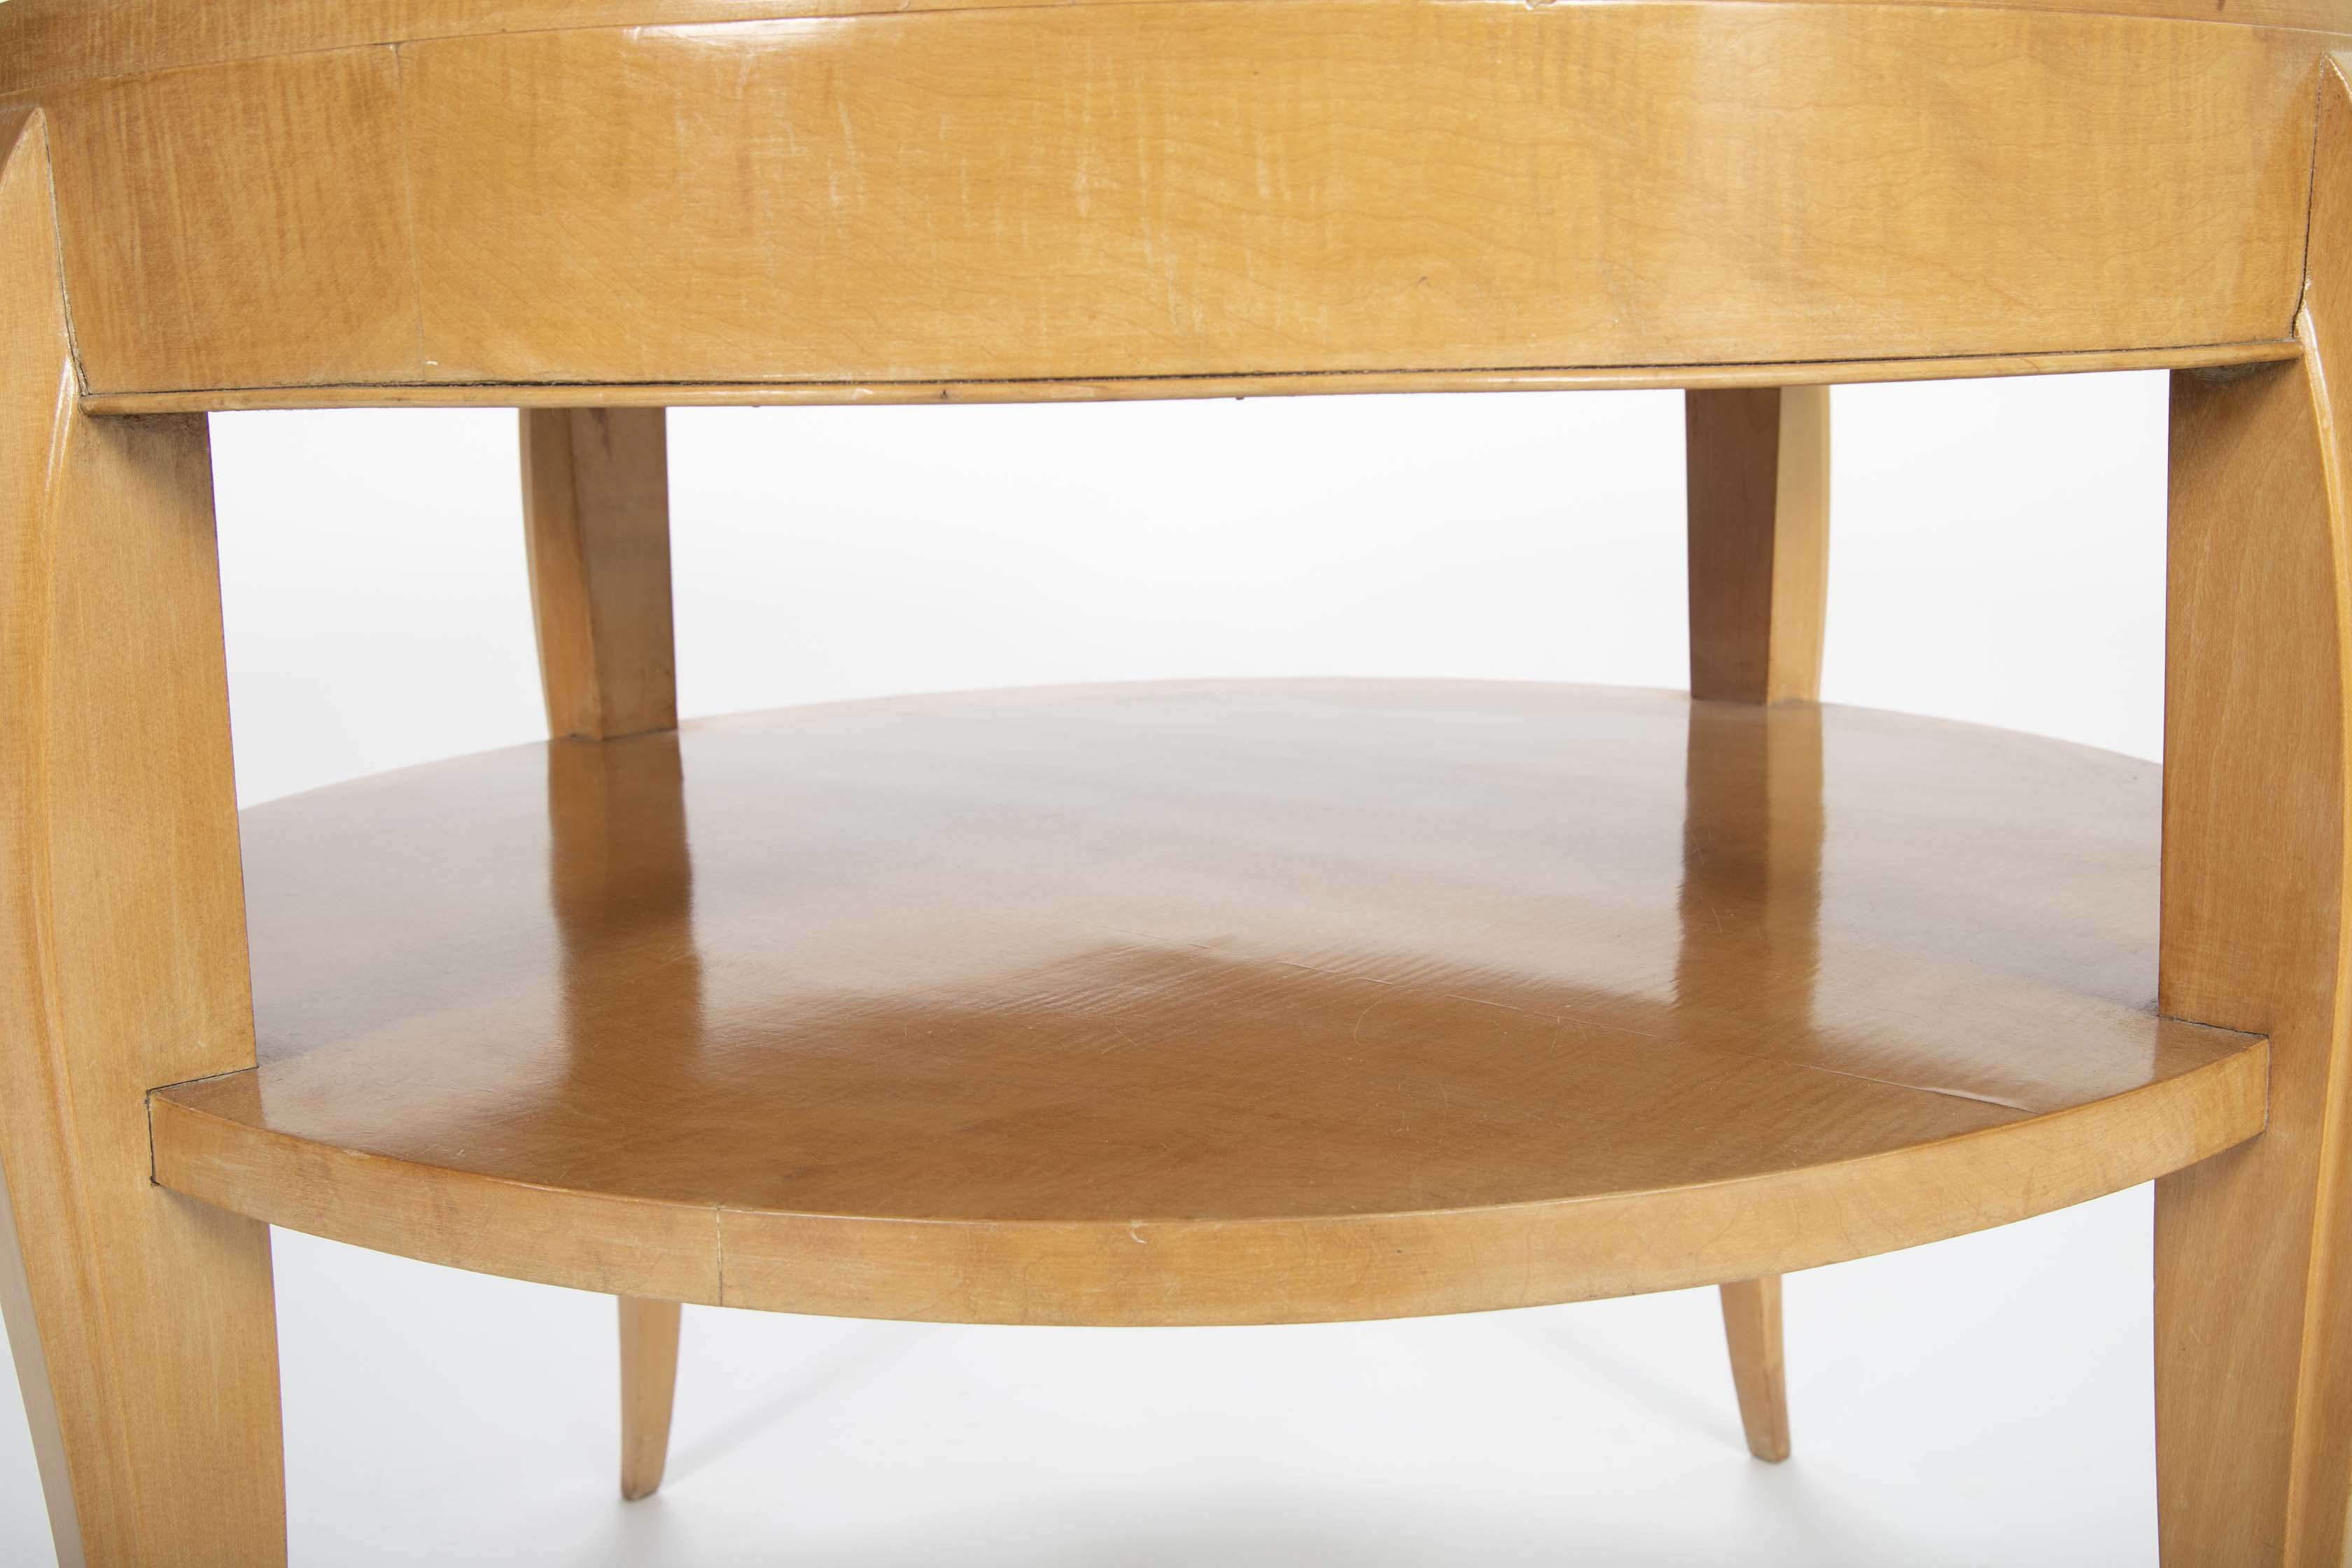 French Art Deco Sycamore Side Table